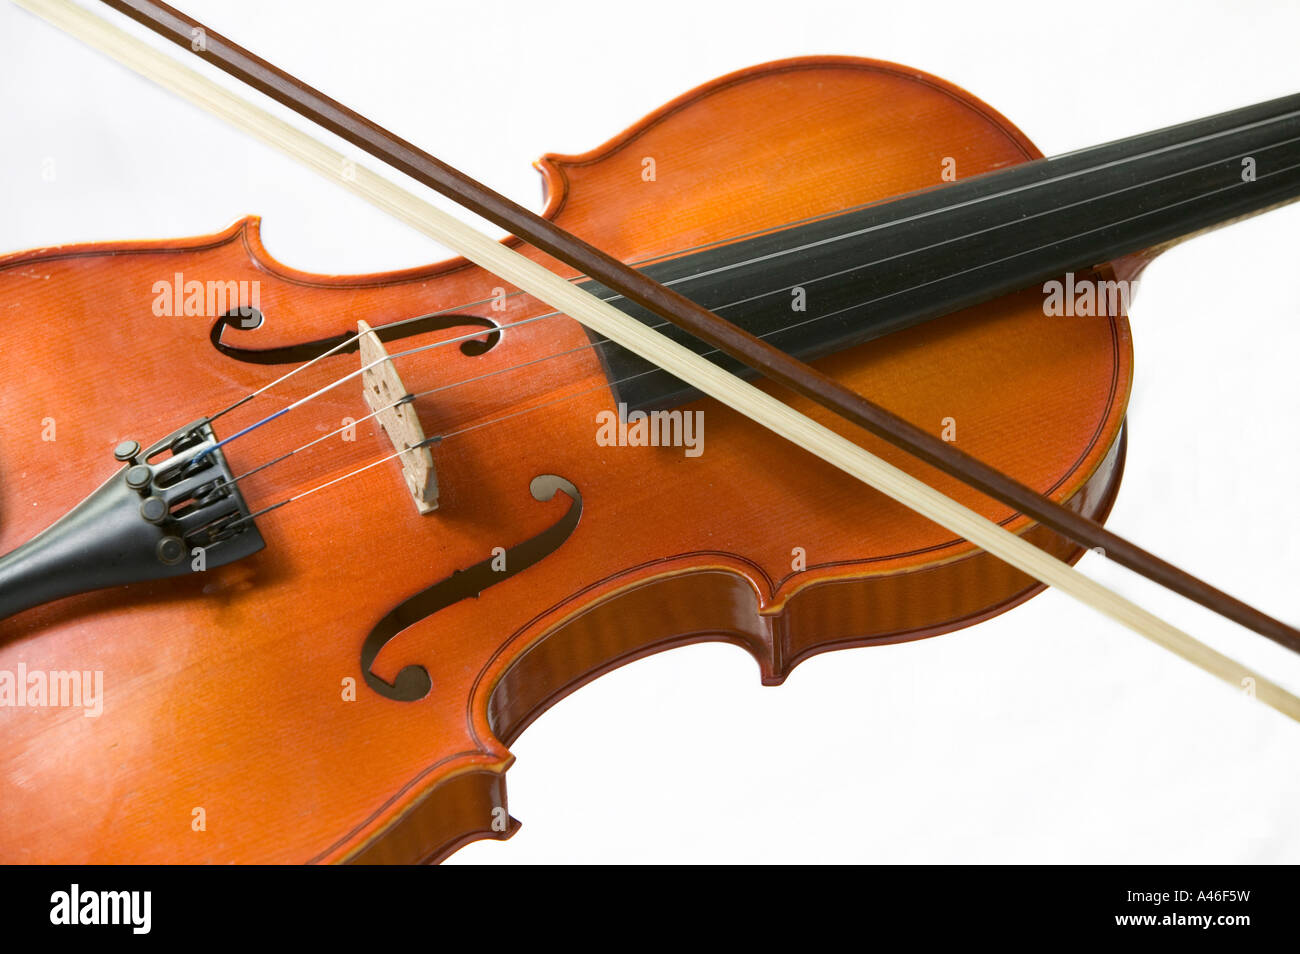 Violin with a violin bow on white background Stock Photo